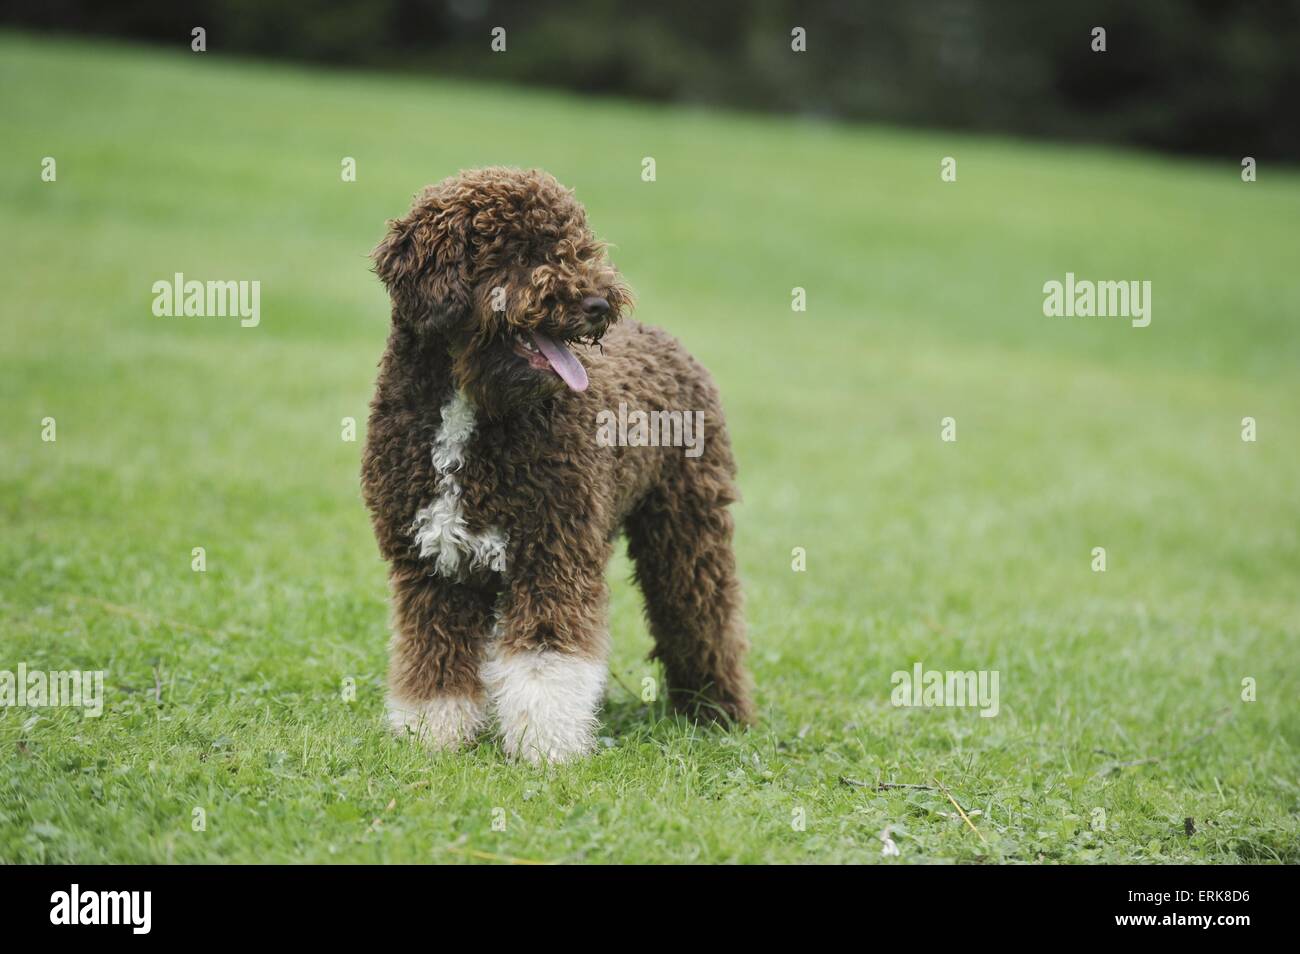 Lagotto Romagnolo High Resolution Stock Photography and Images - Alamy